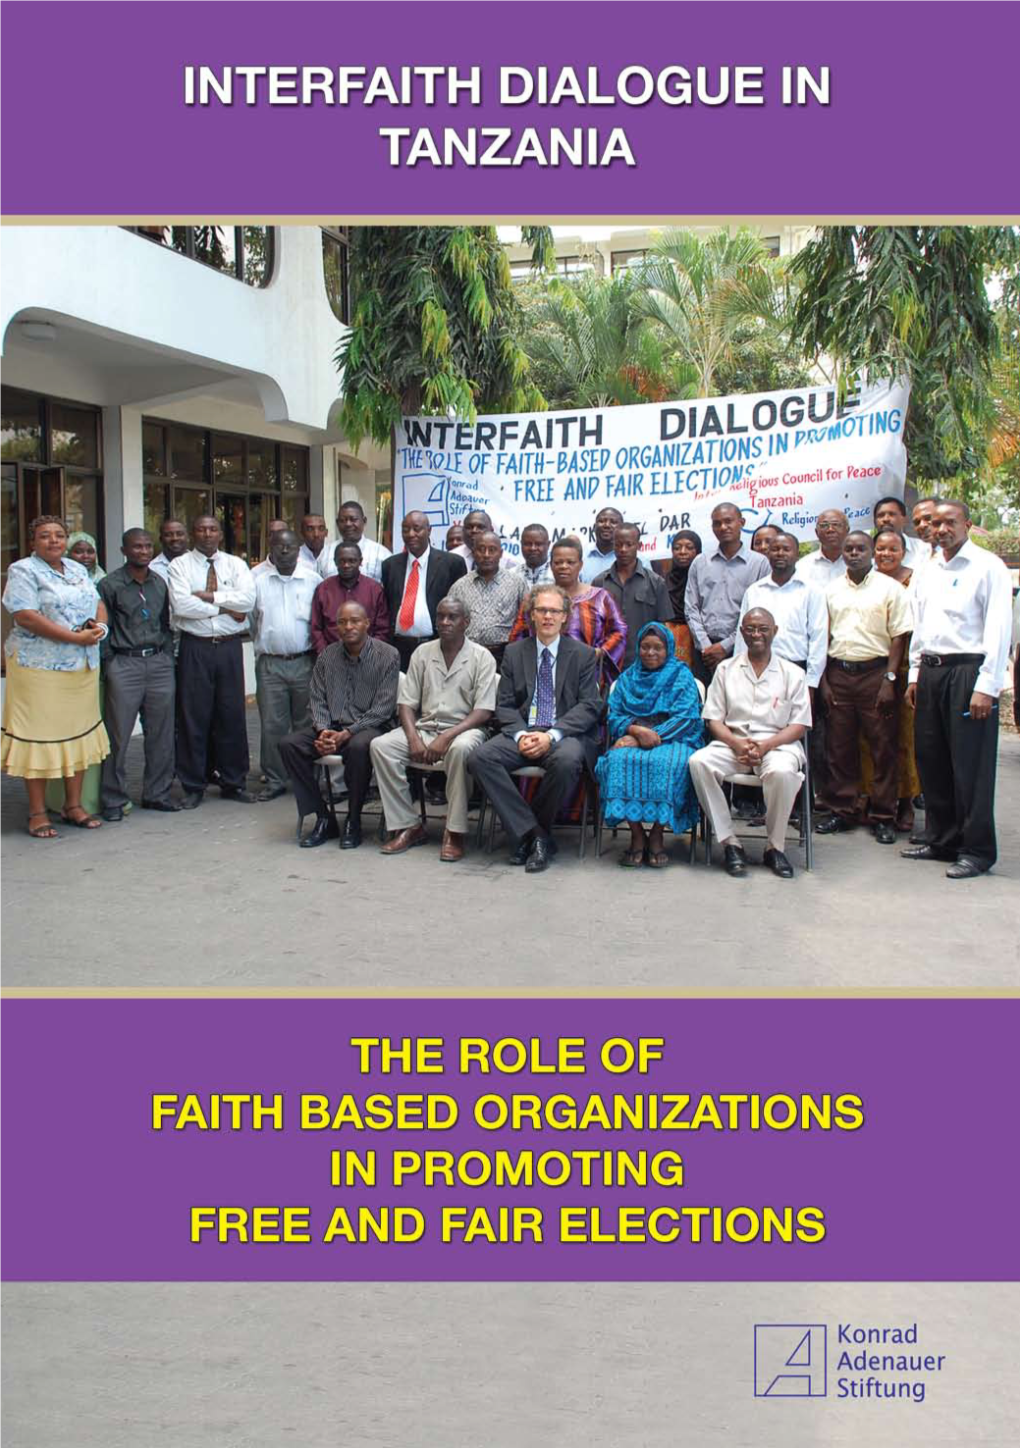 The Role of Faith Based Organizations in Promoting Free and Fair Elections